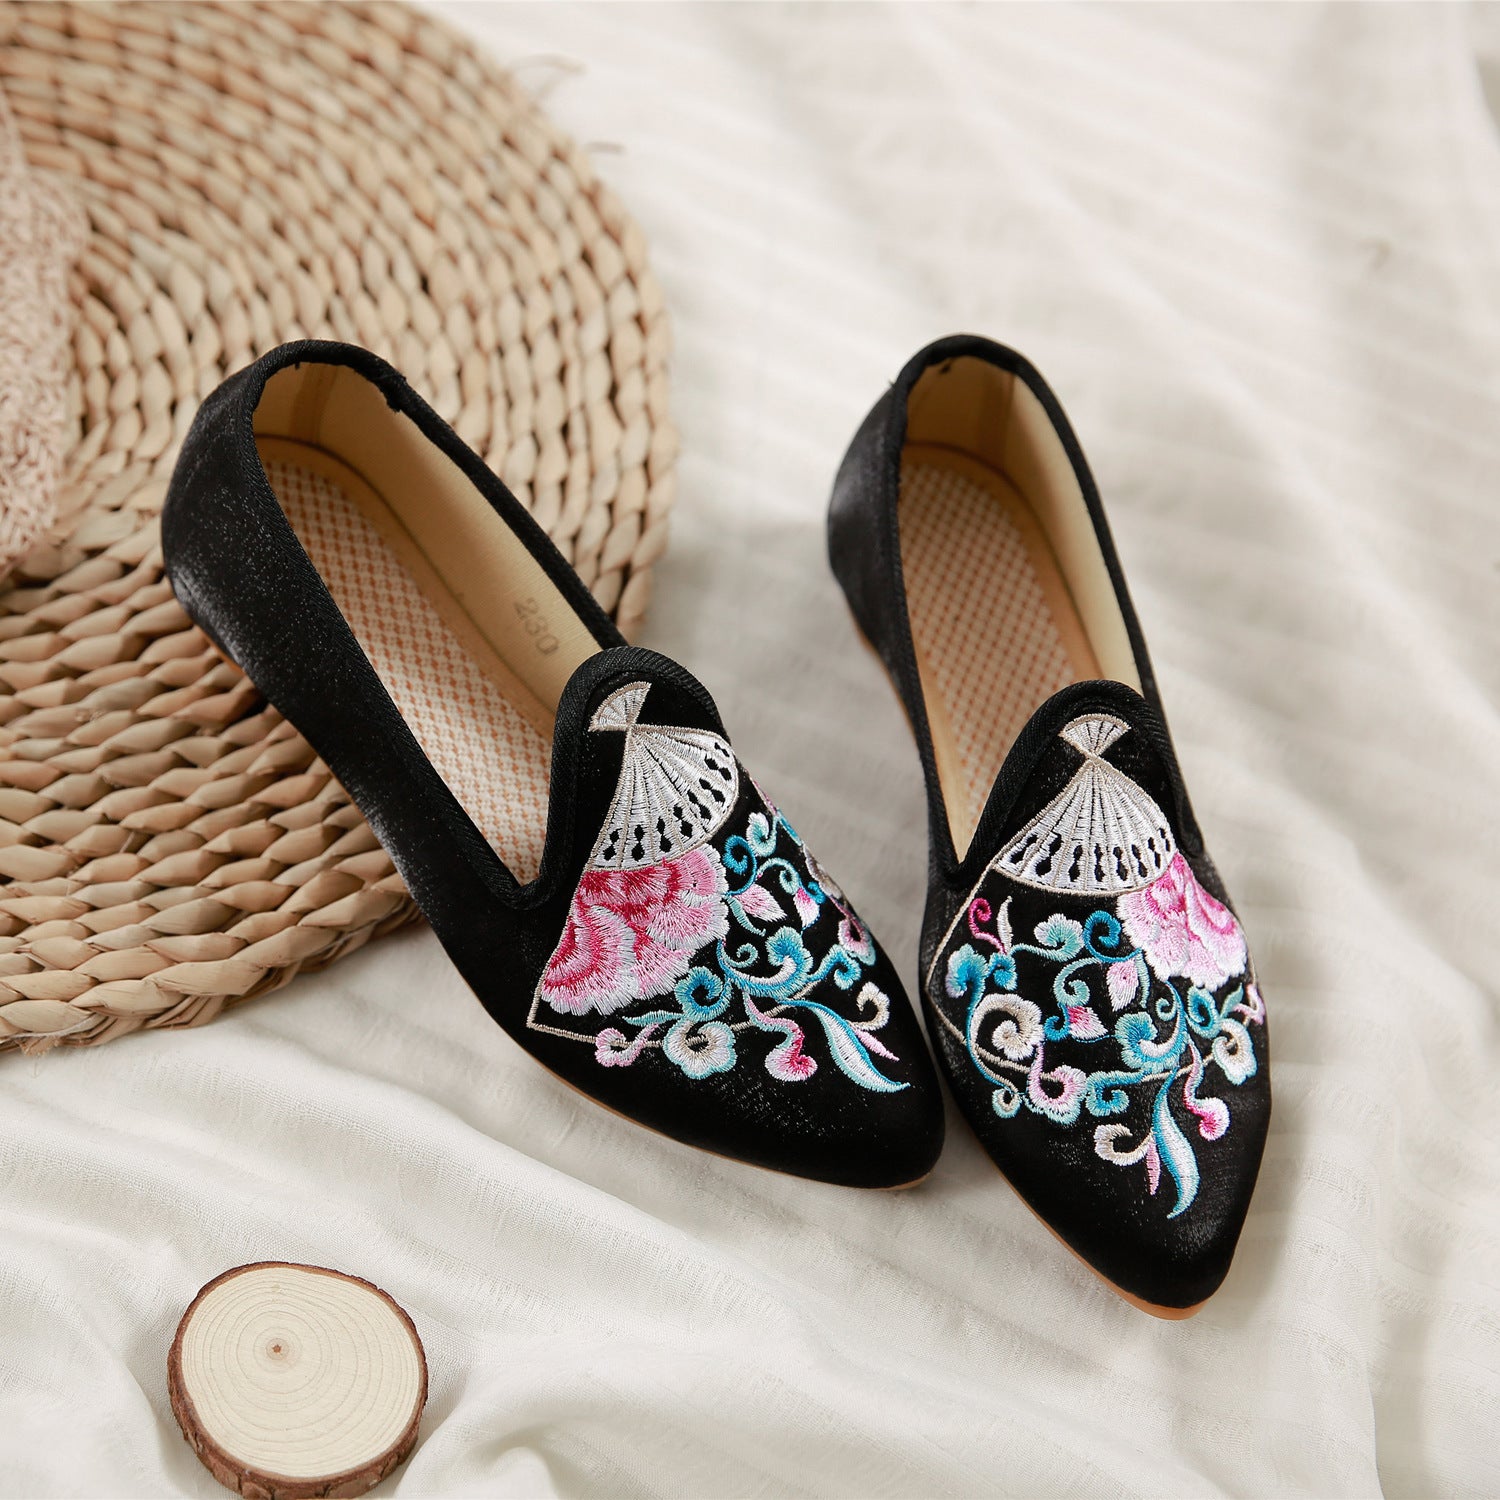 Women's Pumps Retro Shallow Mouth Embroidered Cotton Casual Shoes